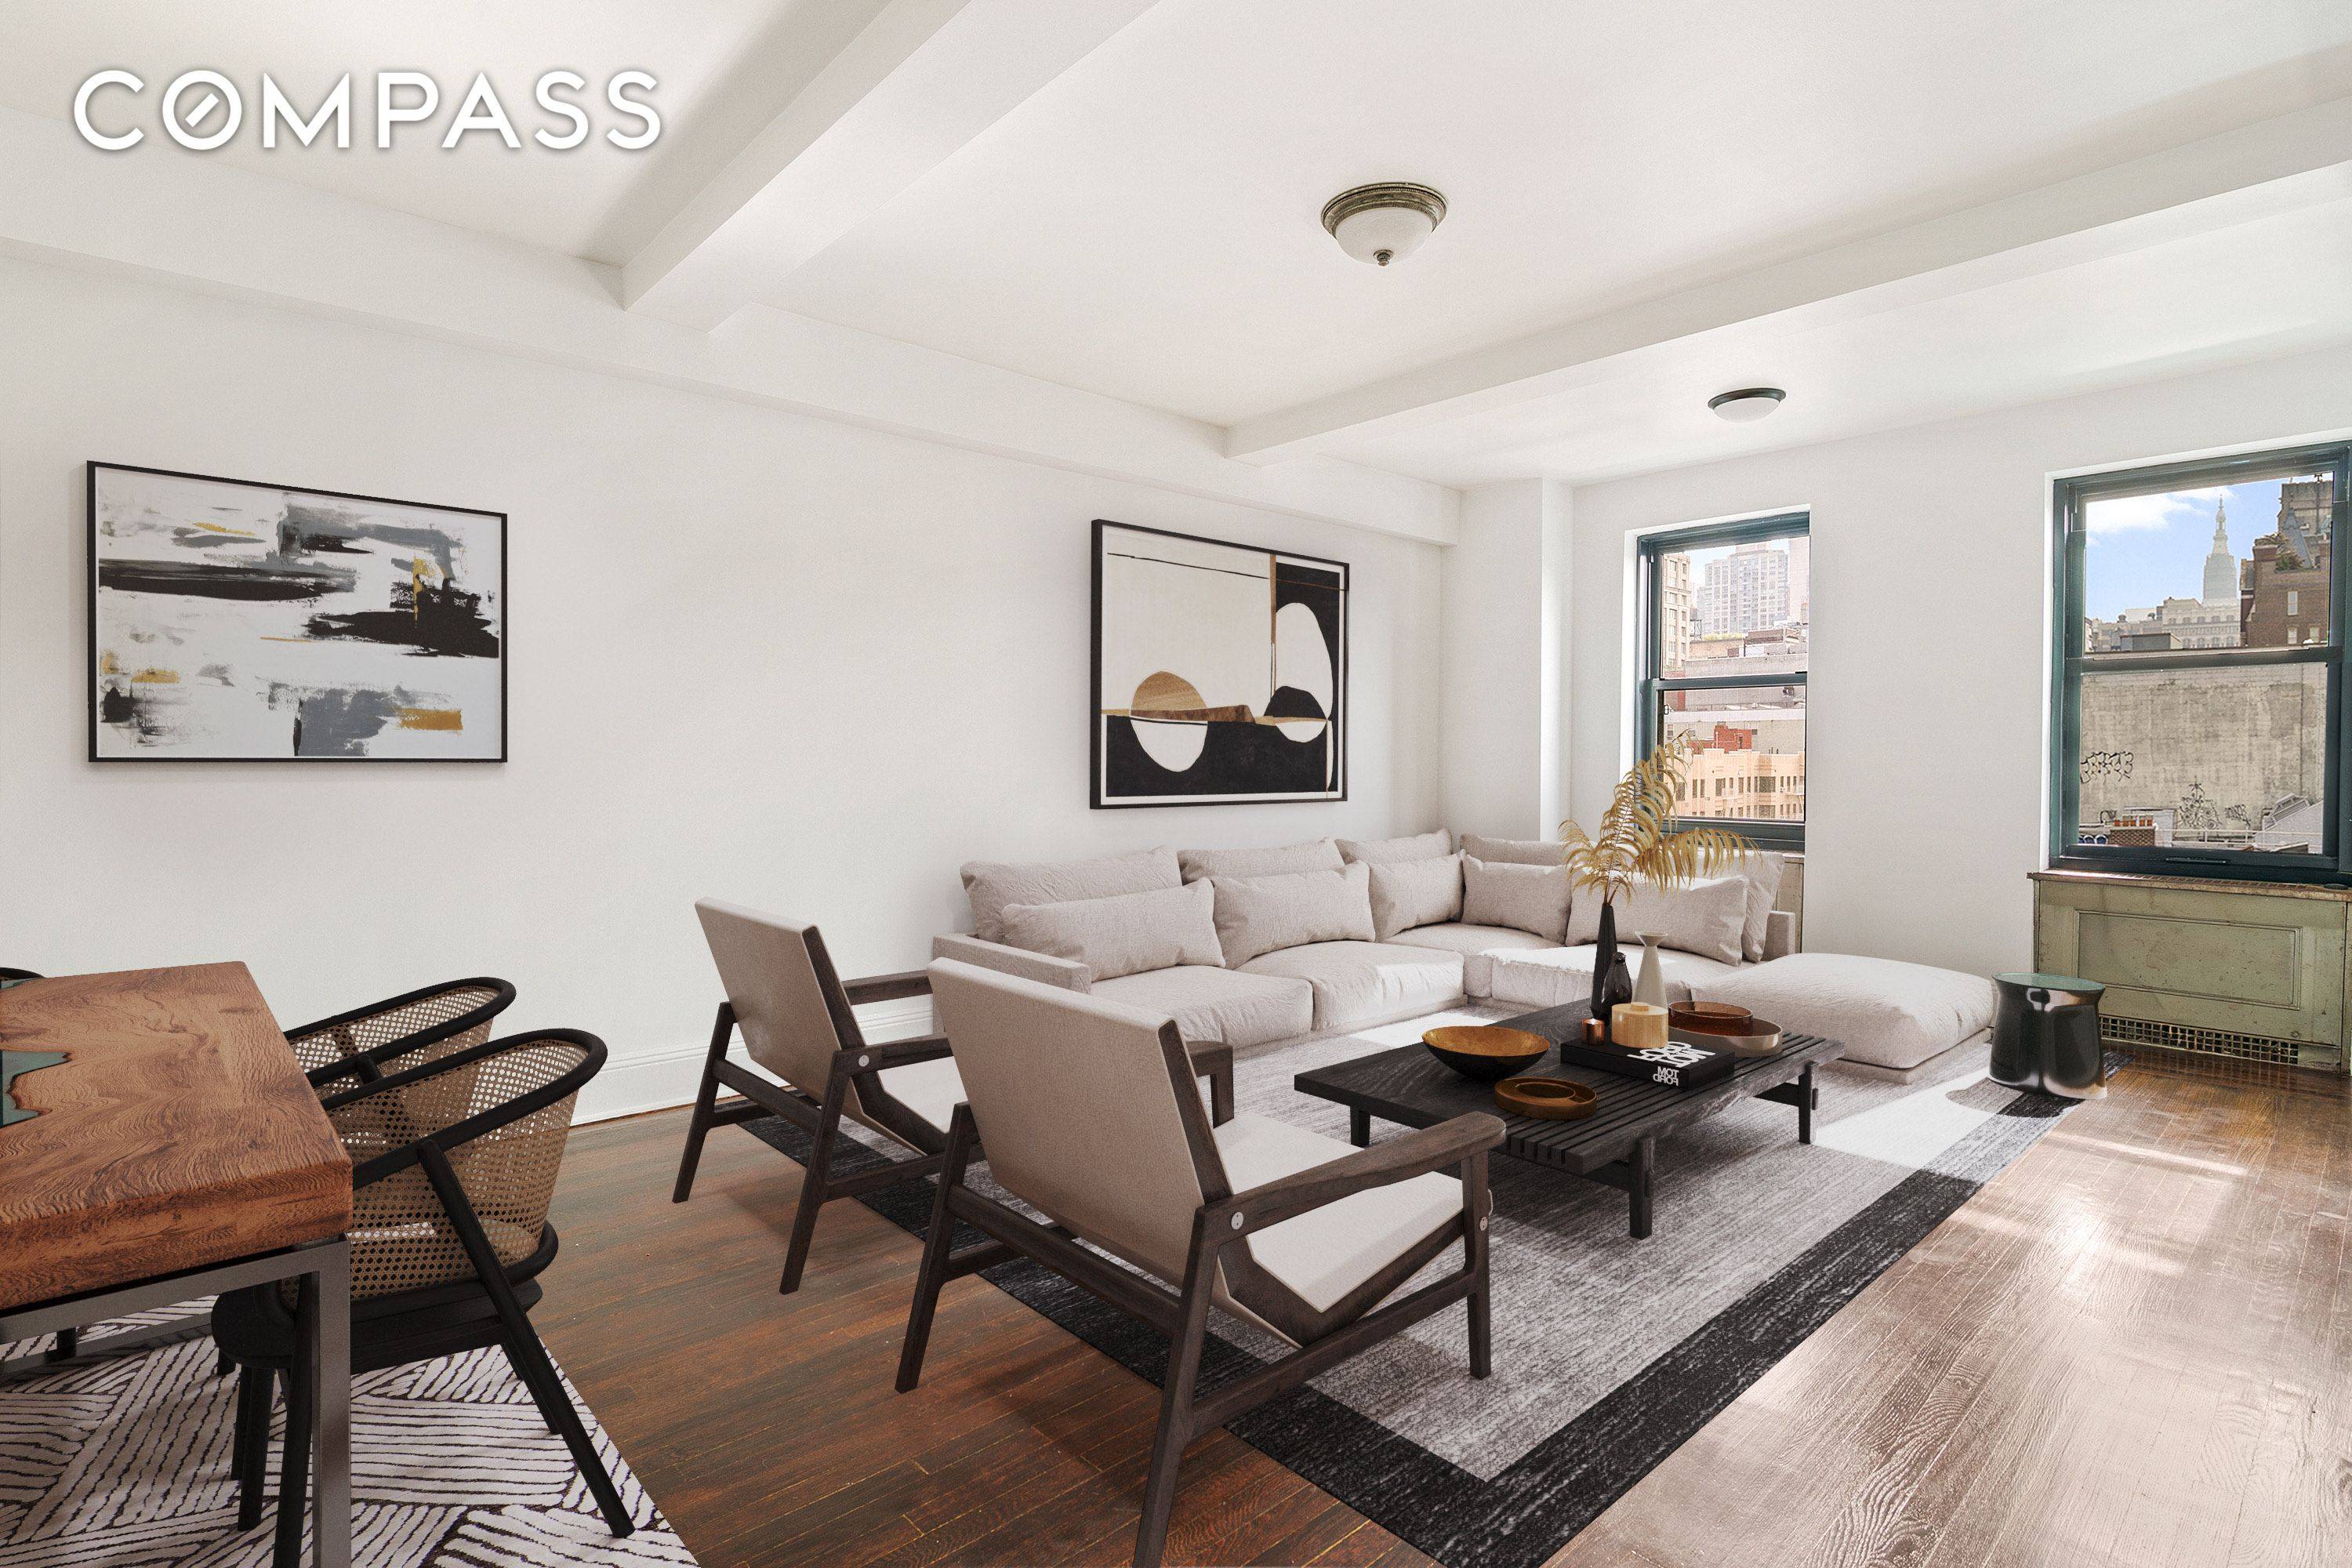 This spacious, light filled one bedroom, one bathroom co op is situated on the 8th floor of a prewar Emery Roth classic, offering breathtaking views of the city skyline.